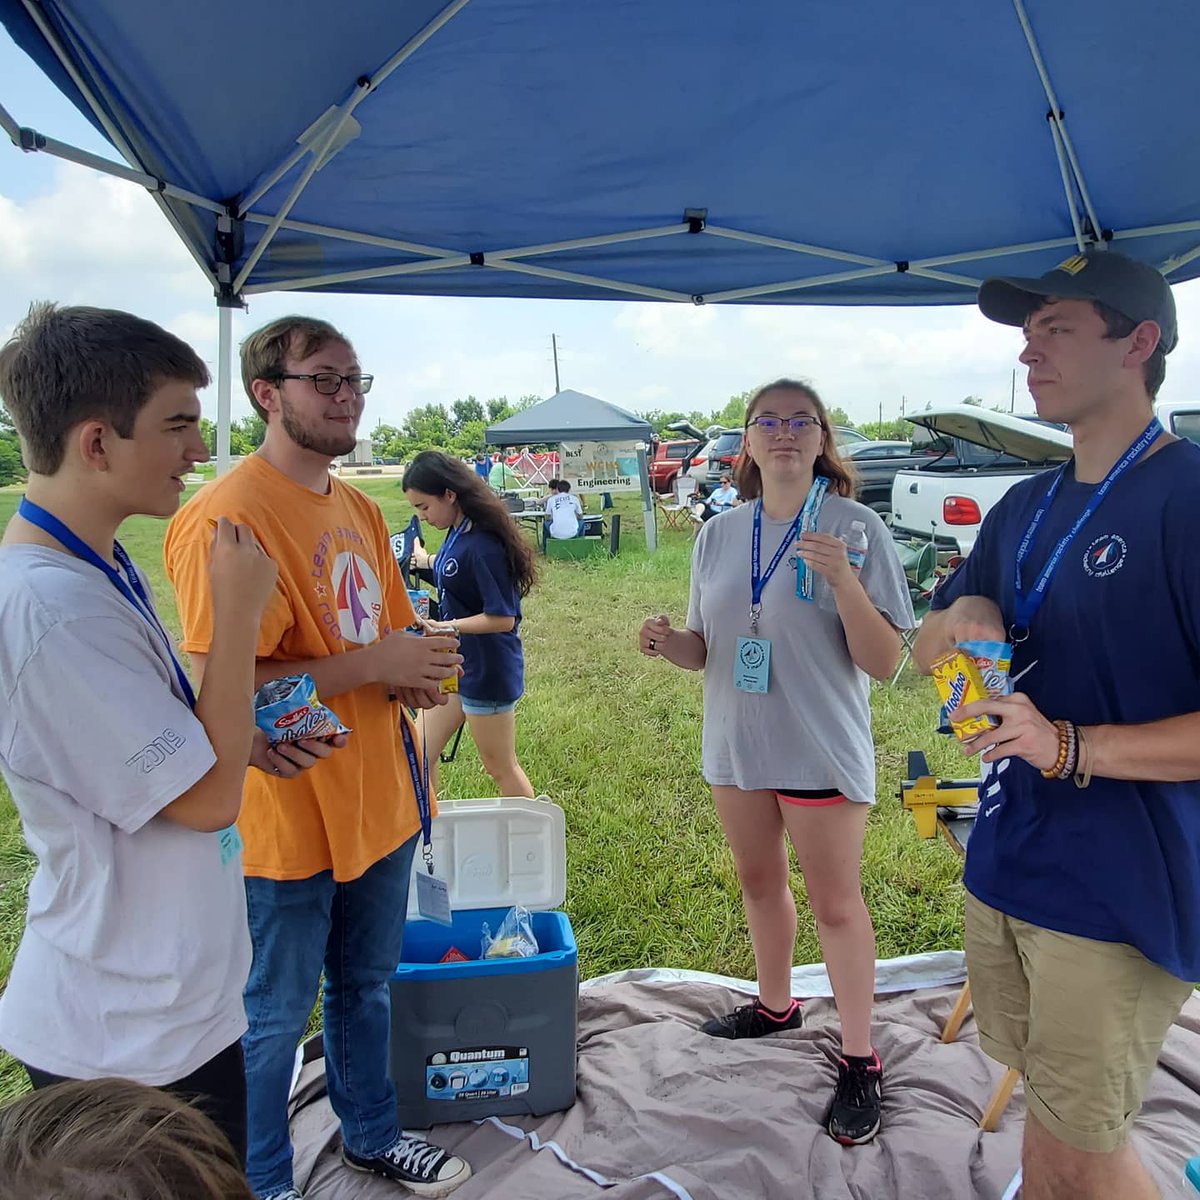 We cannot stress enough how important pre-launch snacks are to flights at #tarc21 Nationals. #lincolnrocketry #rocketcontest #whalescrackers #yoohoo